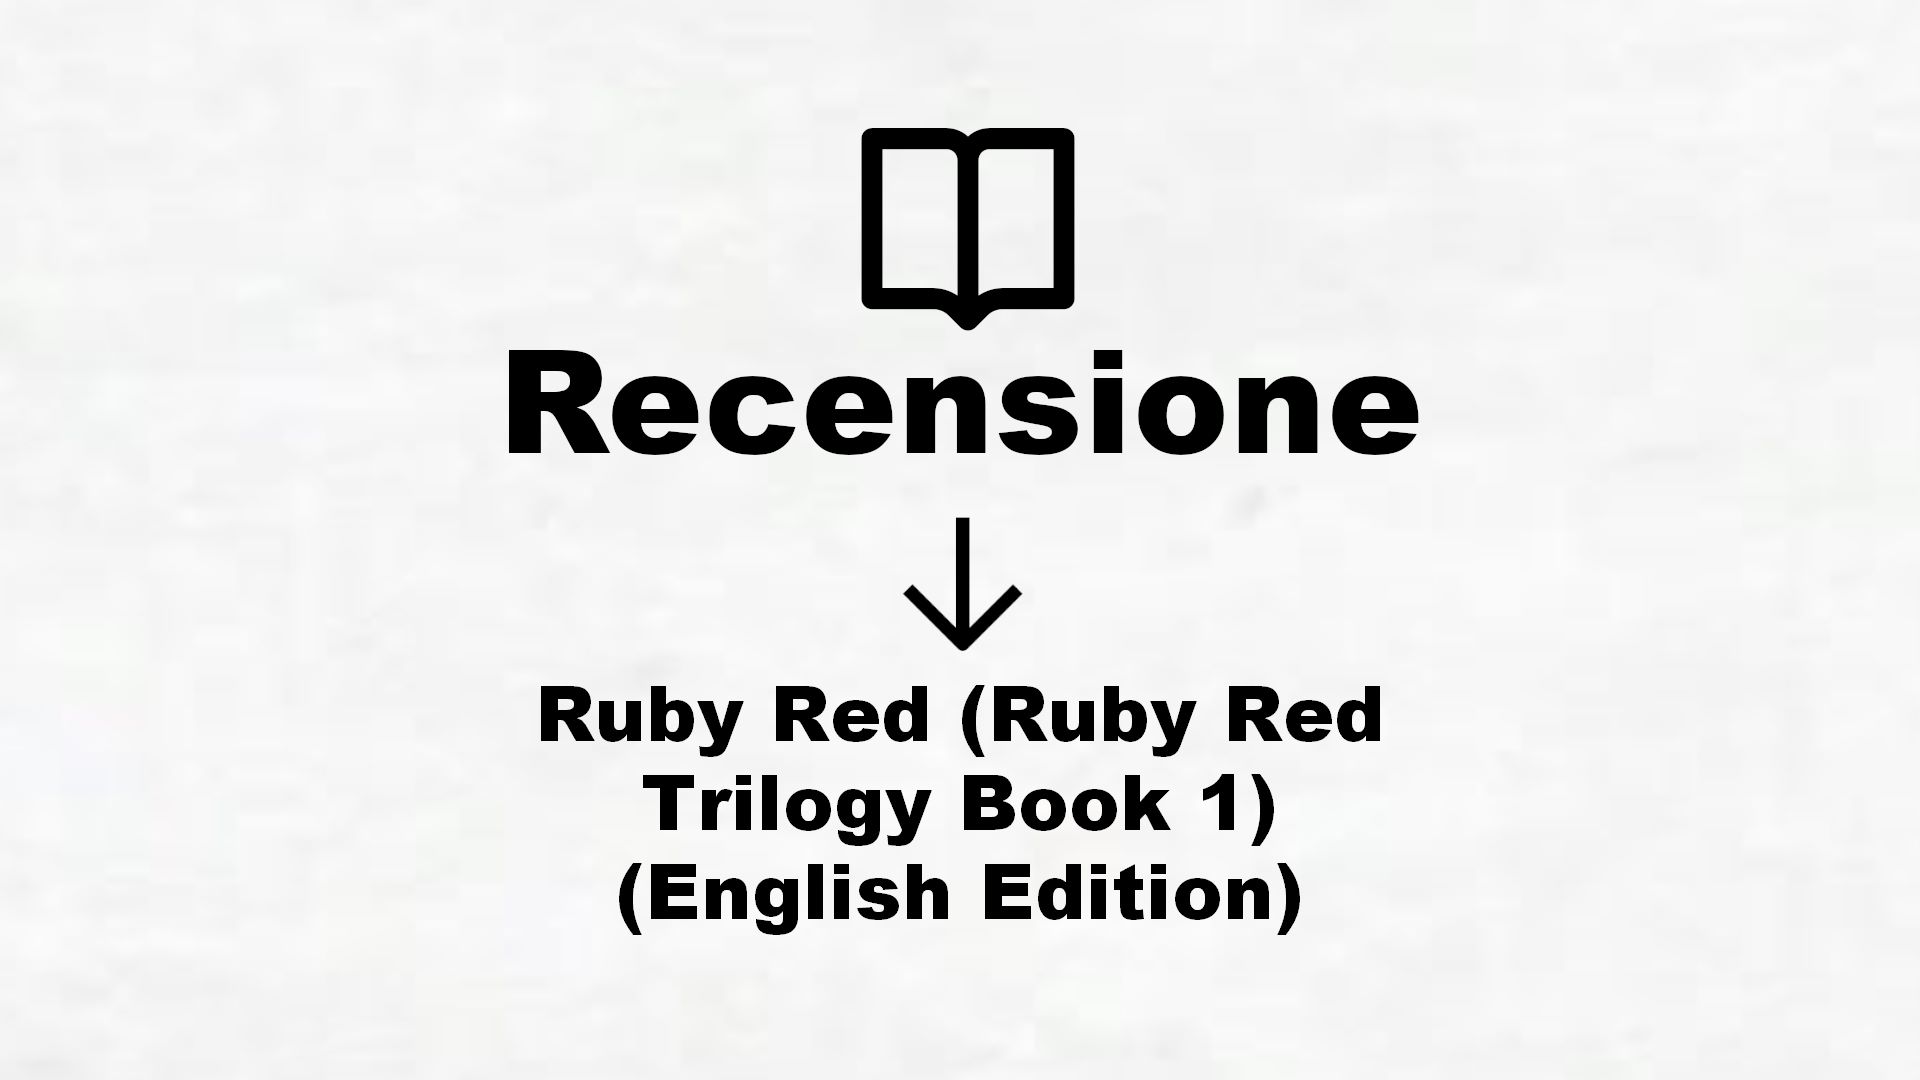 Ruby Red (Ruby Red Trilogy Book 1) (English Edition) – Recensione Libro